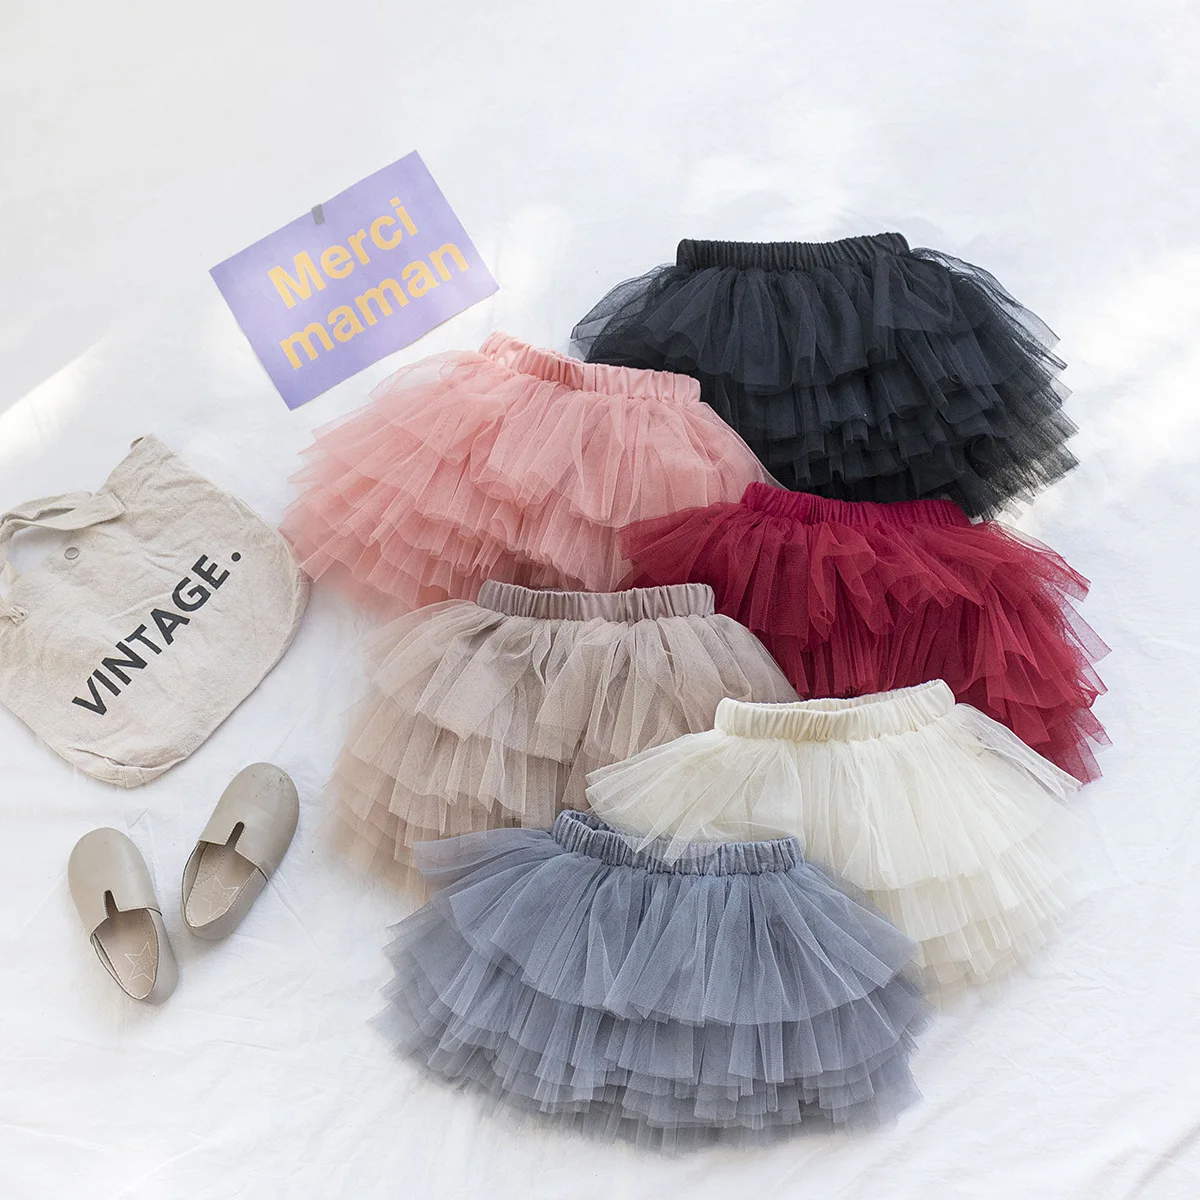 federatie Keizer acre Fashion Fluffy Baby Girl Tutu Skirt Solid Colors Skirts Children 6 Layers  Mesh Puffy Tulle Tutu Skirt Fit 1-6t Kids - Buy Fluffy Baby Girl Tutu Skirt,Baby  Girl Mesh Puffy Tulle Skirt,6